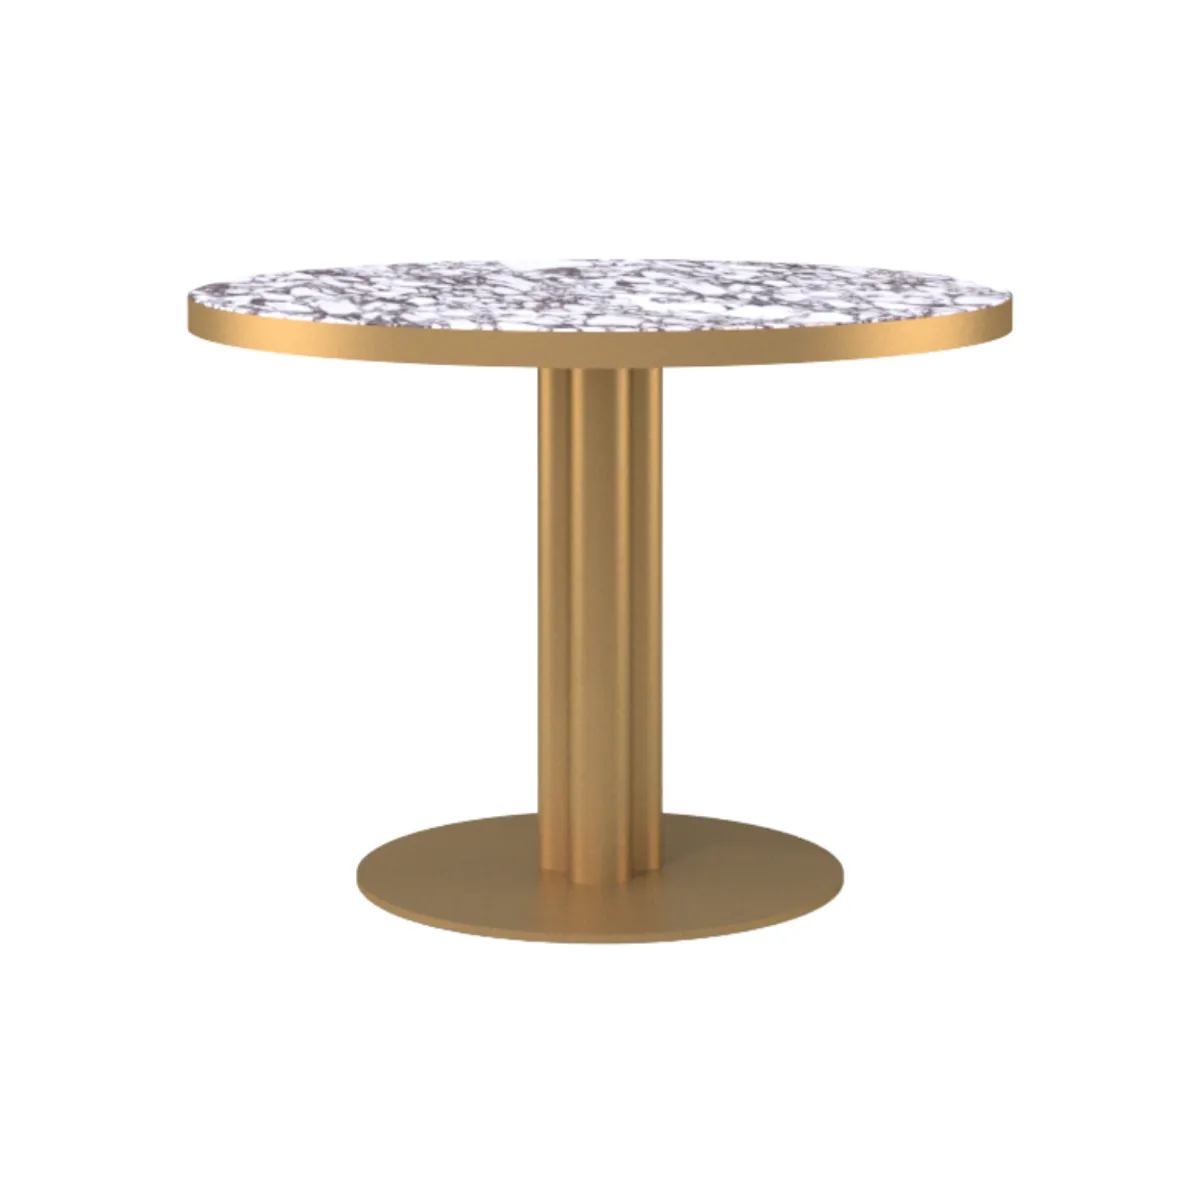 Gouqi oval dining table 2